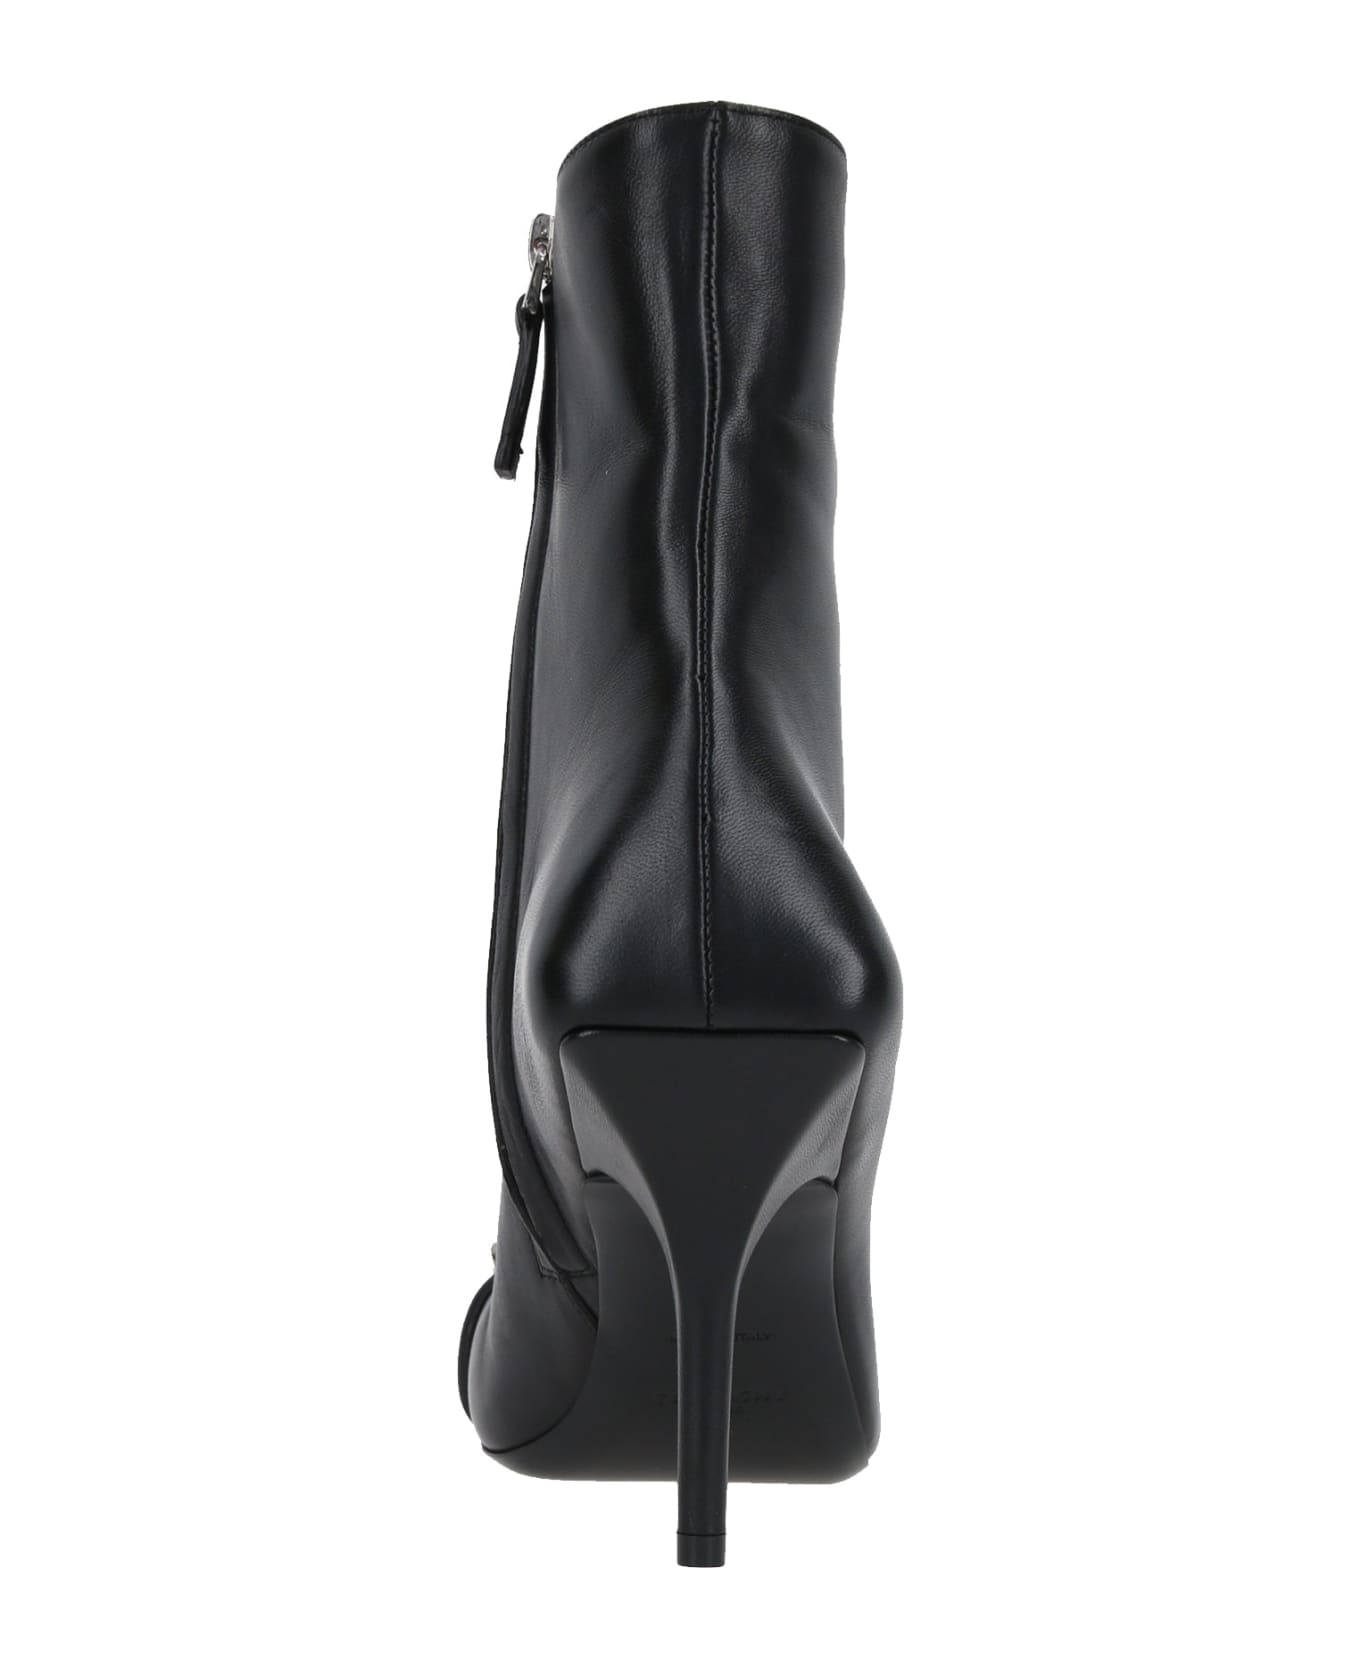 Givenchy Leather Boots - Black ブーツ